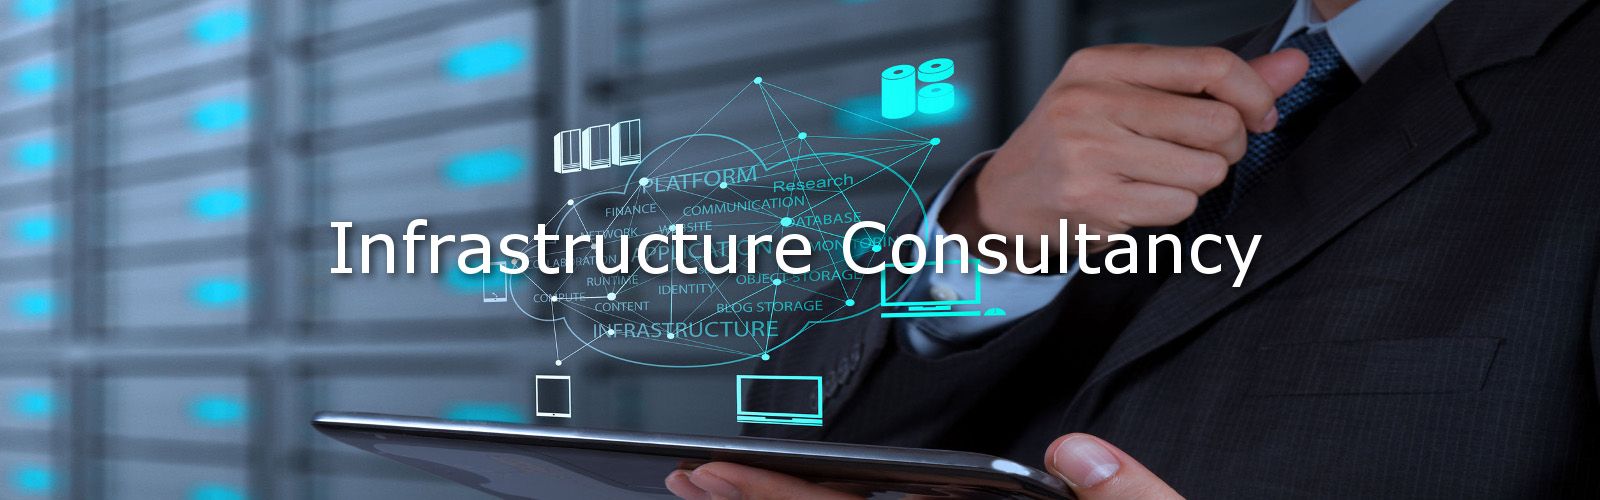 J2 Technology Infrastructure Consultancy